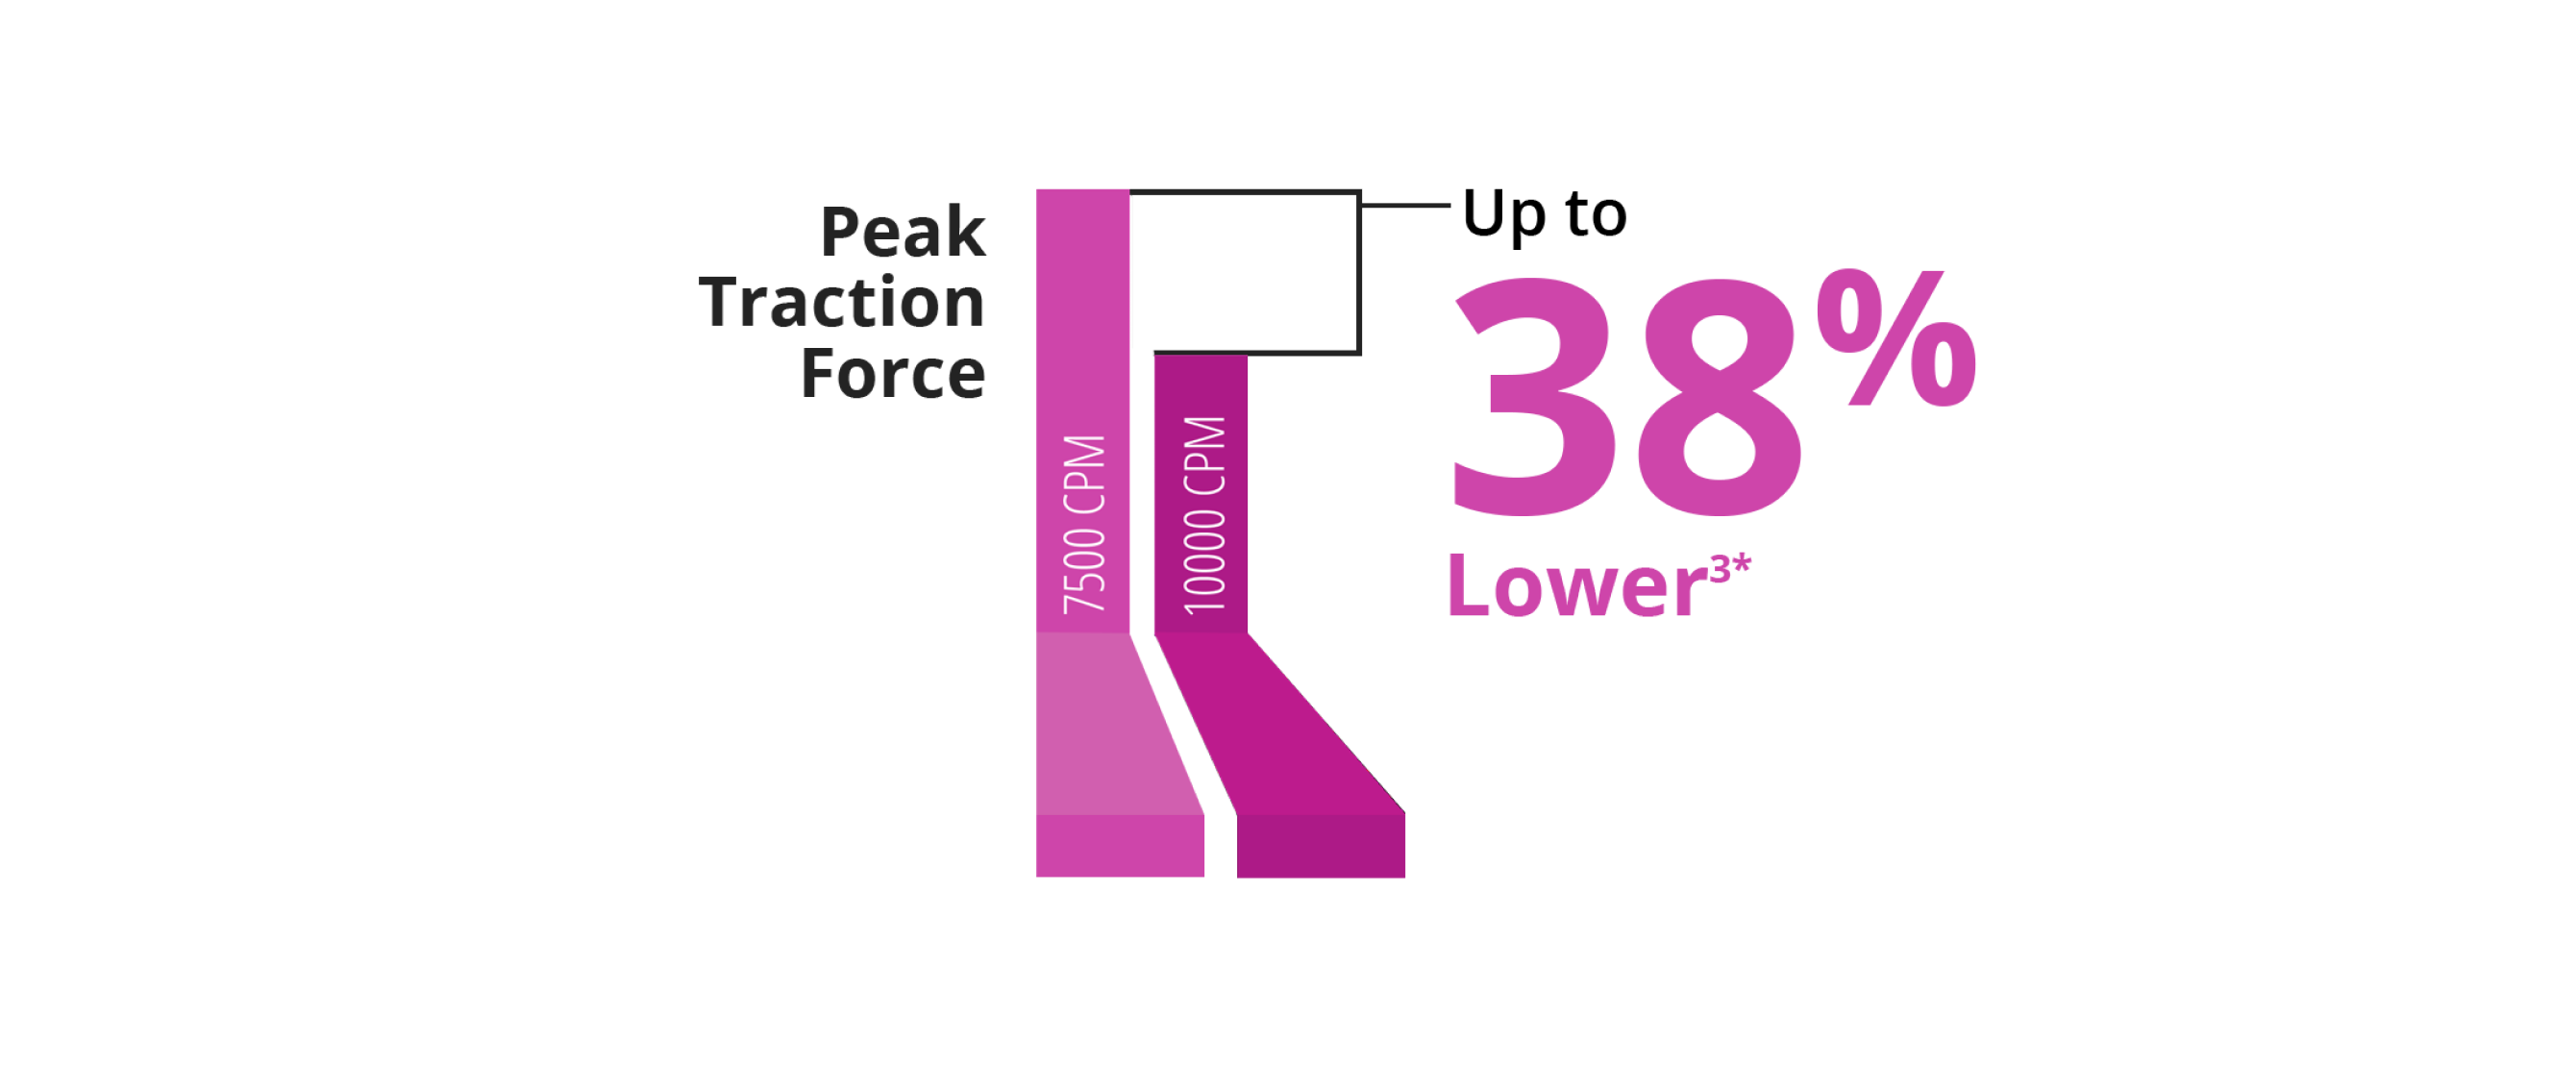 A bar graph comparing the peak traction force between the 7.5K and 10K 27+ Gauge Advanced ULTRAVIT probe. The 10K probe has a 38% lower pulsatile traction.